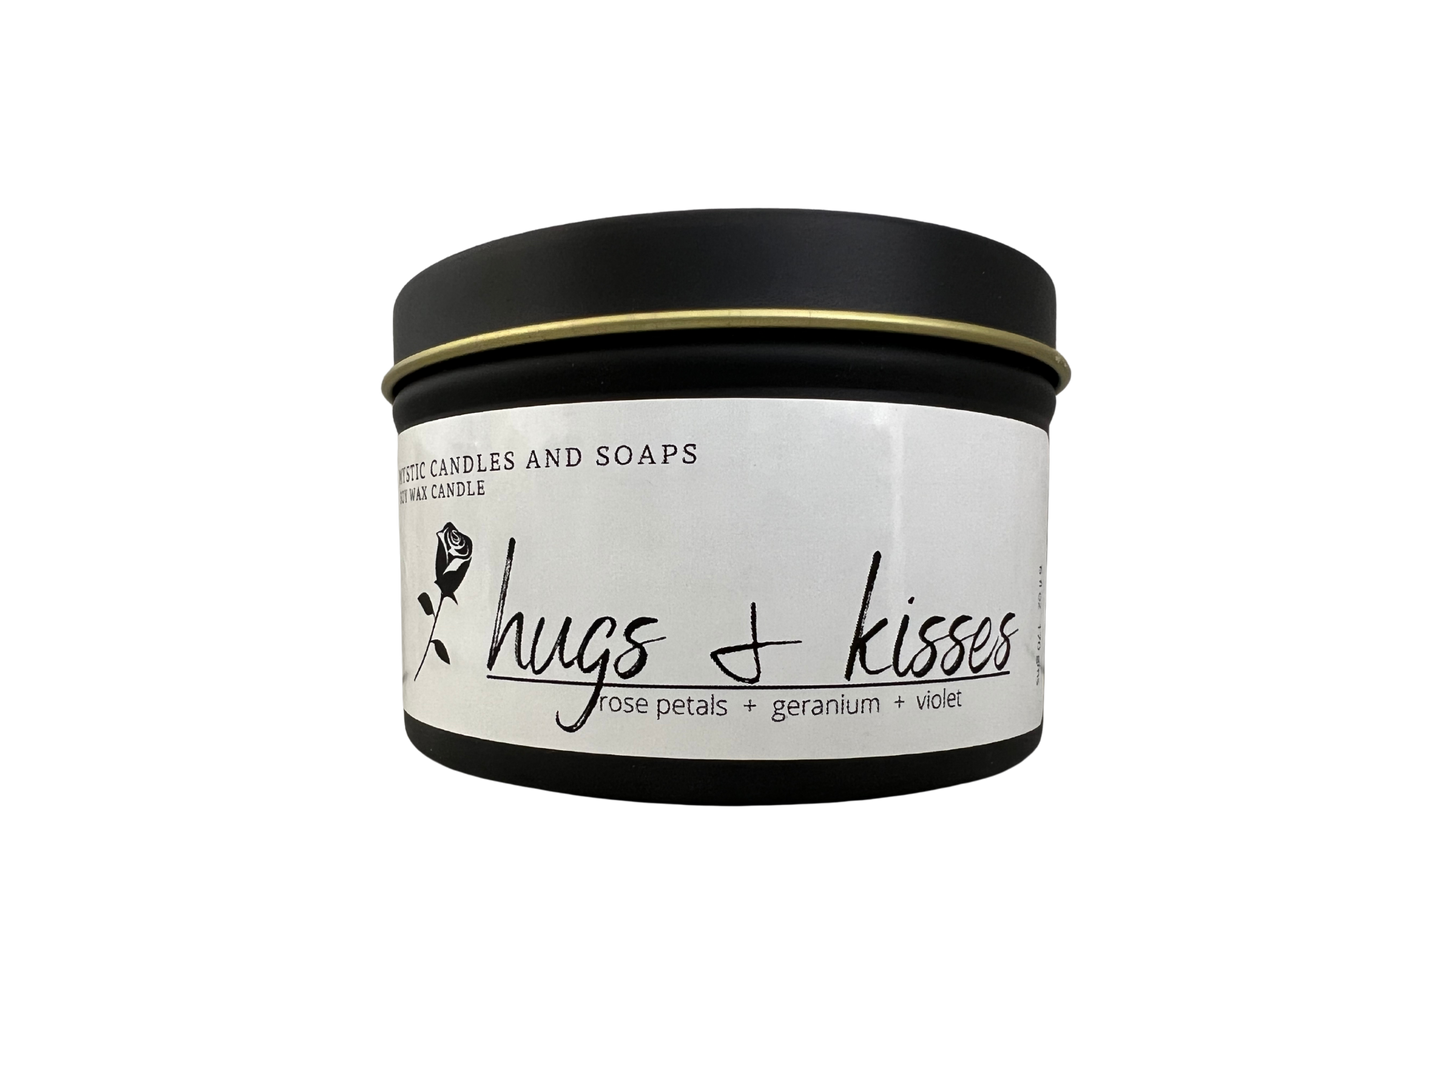 Hugs & Kisses Flameless Candle - Mystic Candles and Soaps LLC